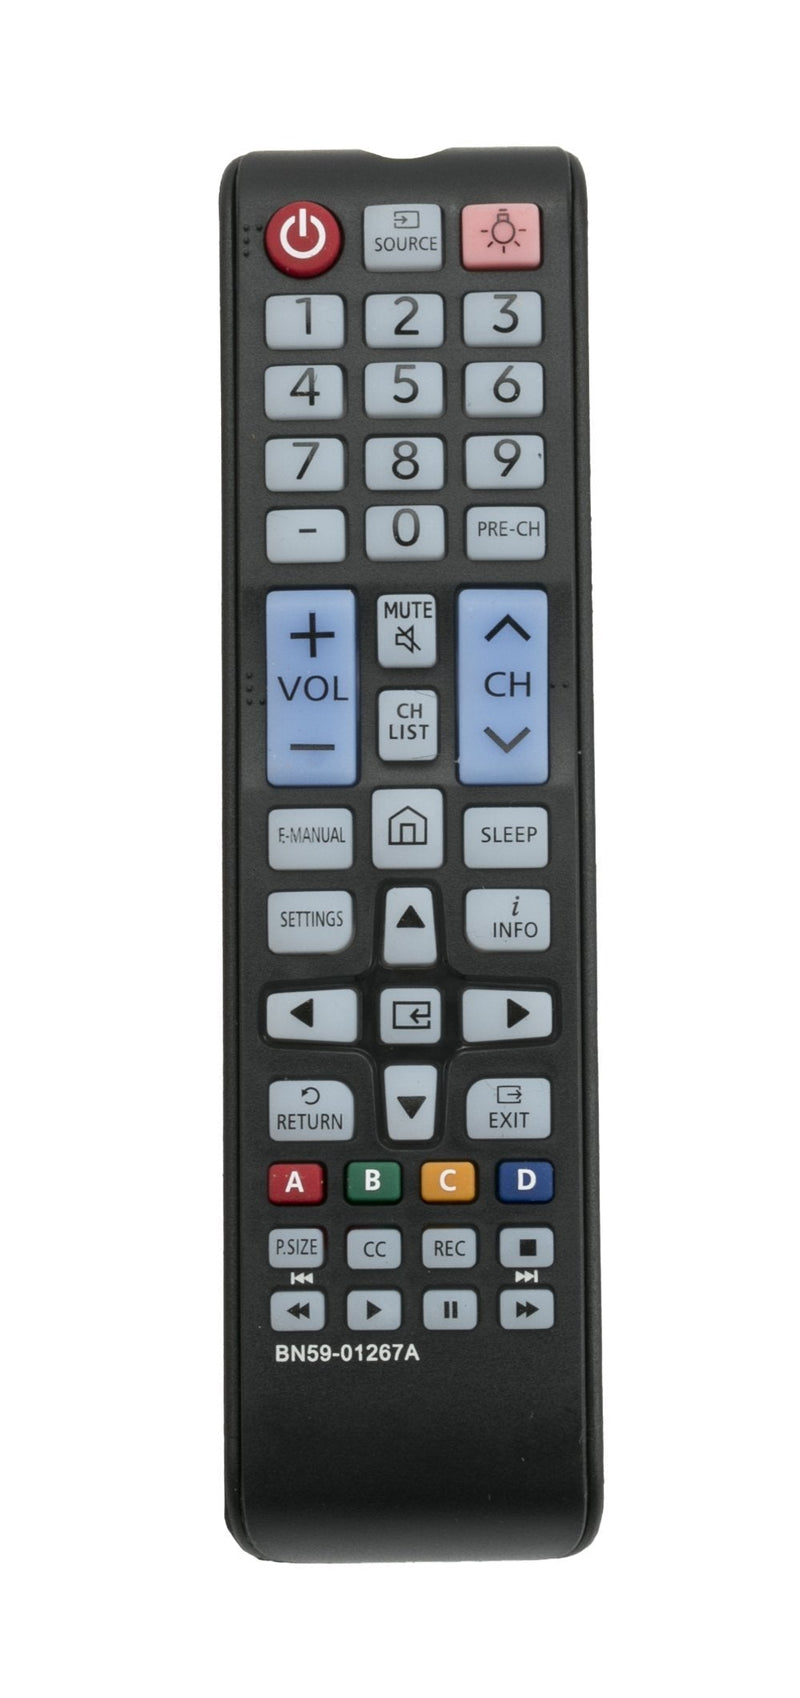 New BN59-01267A Replaced Remote Control for Samsung HDTV UN40M530DAFXZA UN43MU6290FXZA UN49M530DAFXZA LN32C450E1V UN32M530DAFXZA UN49MU6290FXZA UN55MU6290FXZA UN65MU6290FXZA - LeoForward Australia